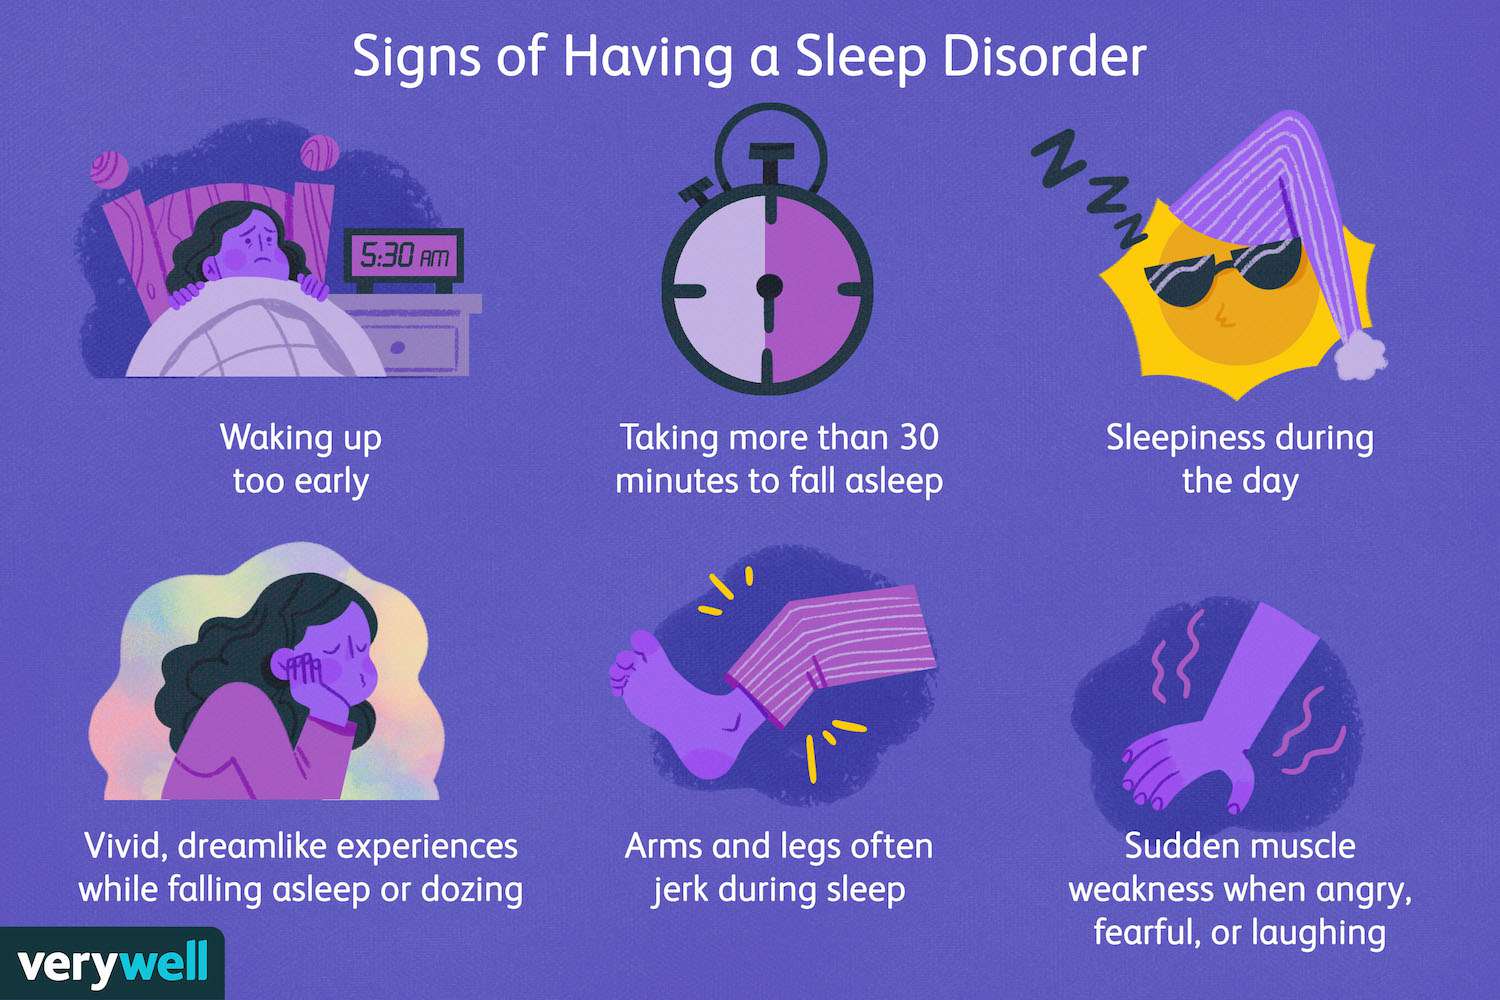 How can sleep disorders impact relationships and family life?